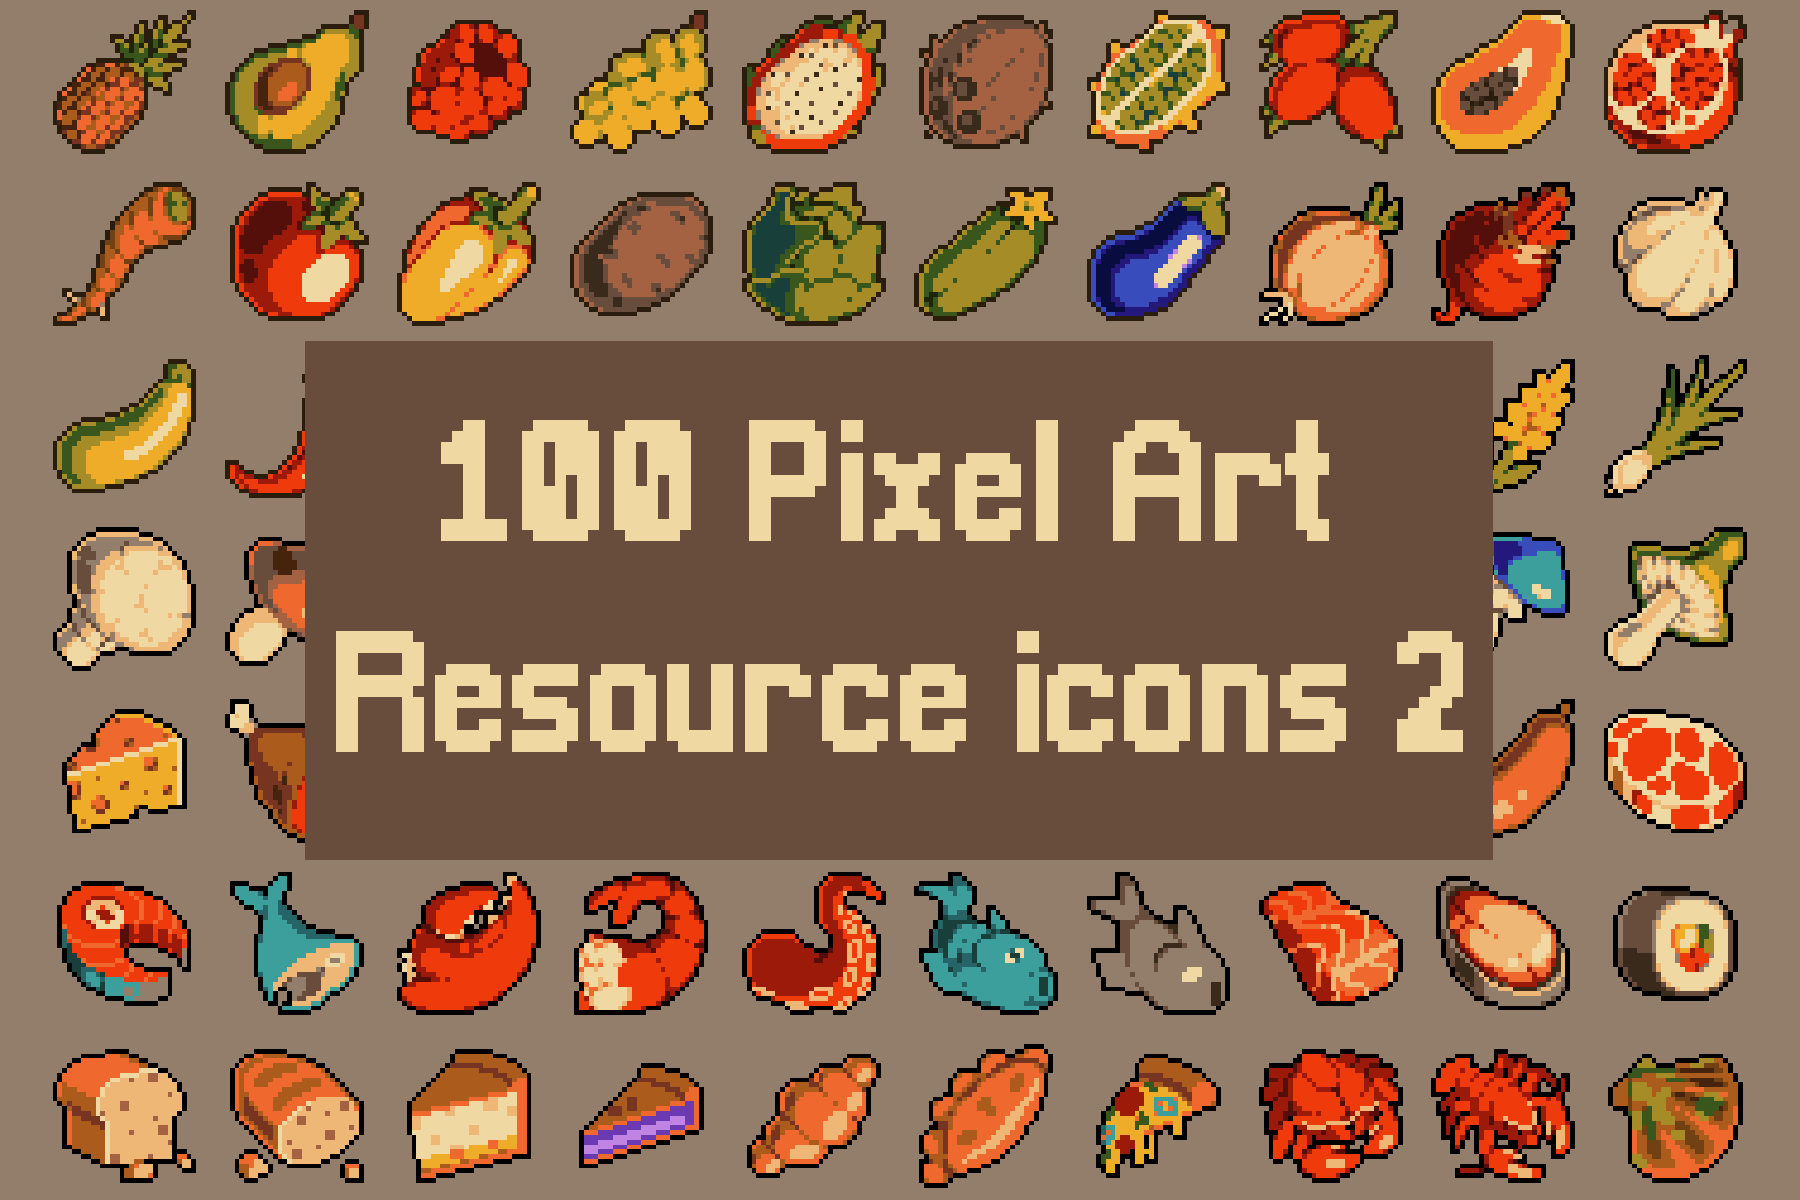 Pixel Art 32x32 for Android - Download